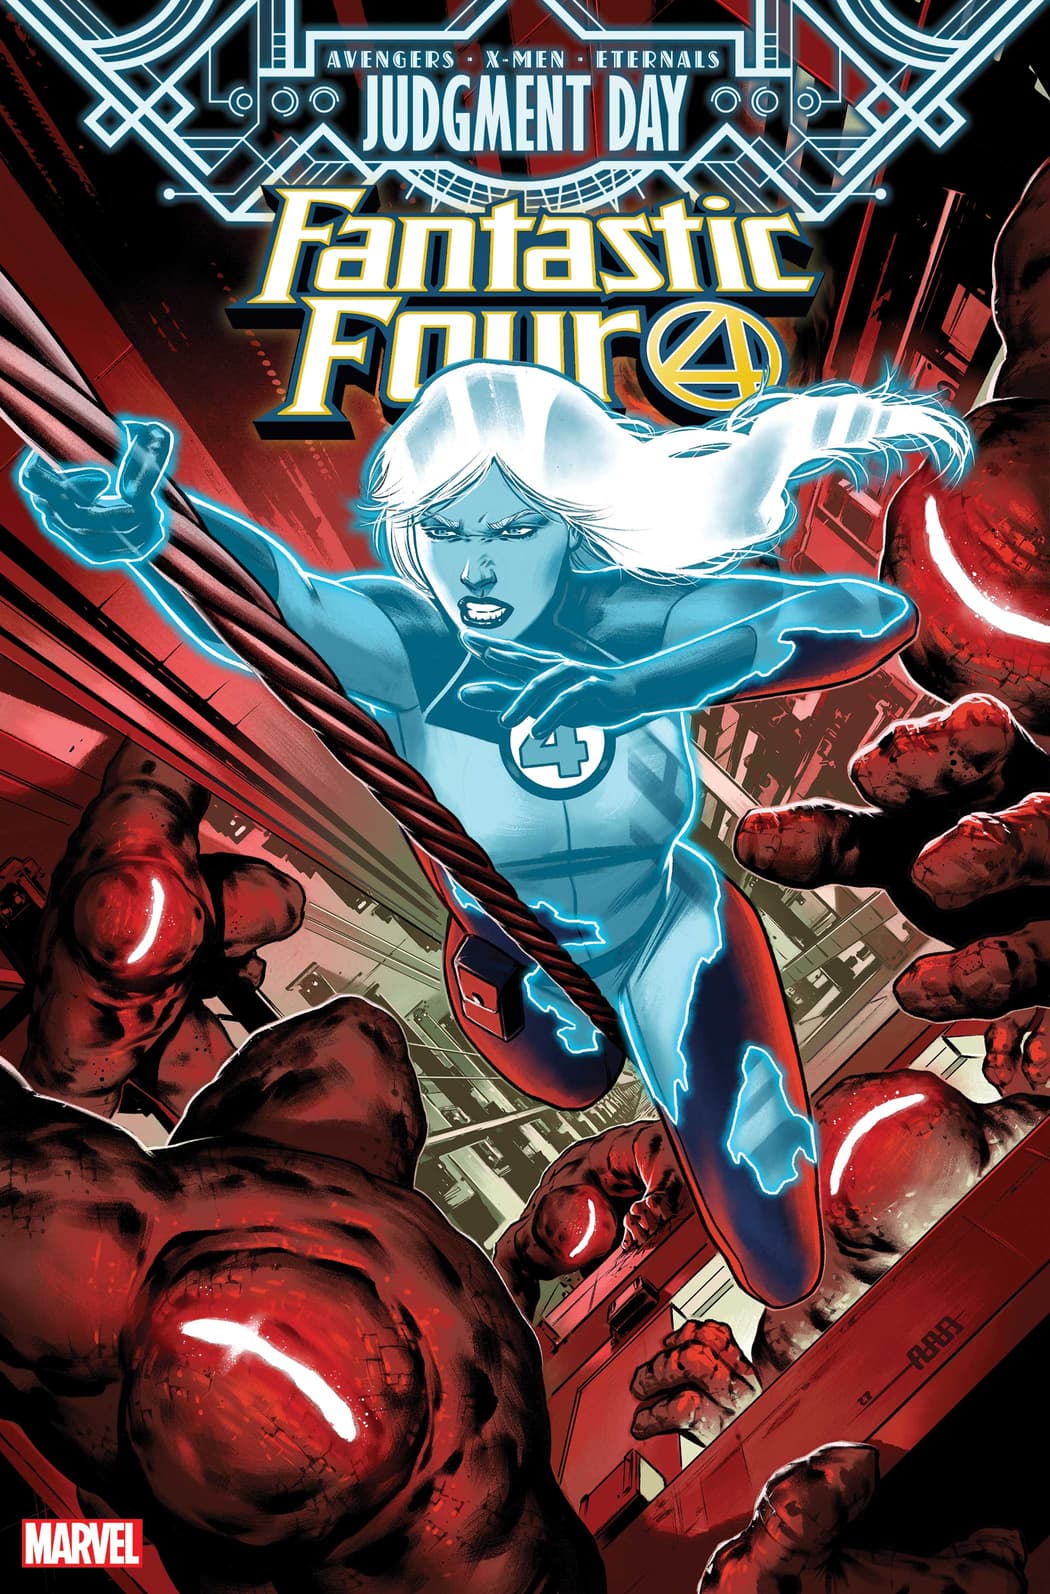 FANTASTIC FOUR #47 cover by Cafu